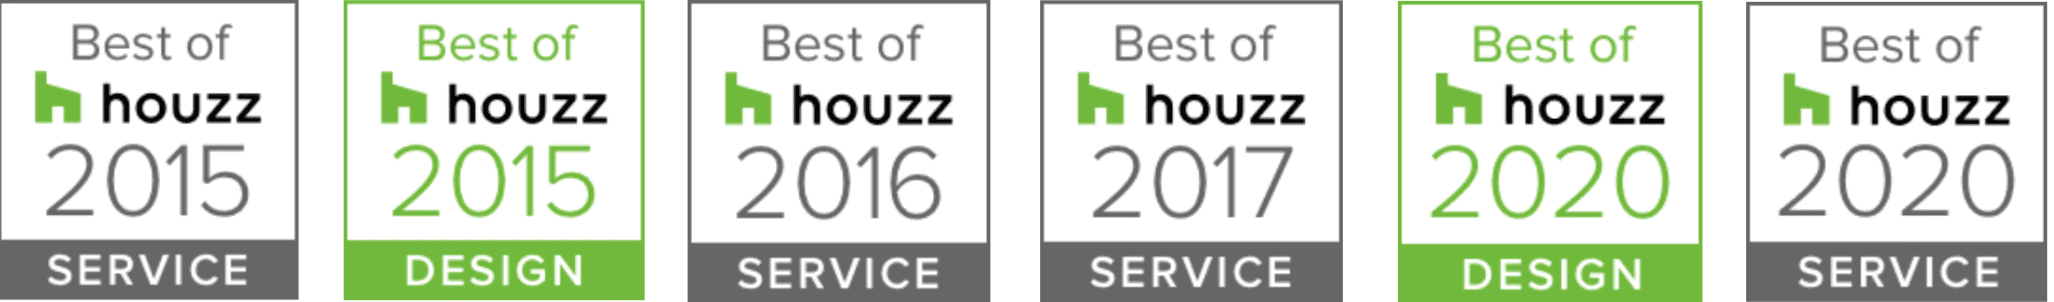 Hochuli Design and Remodeling Team Houzz Awards